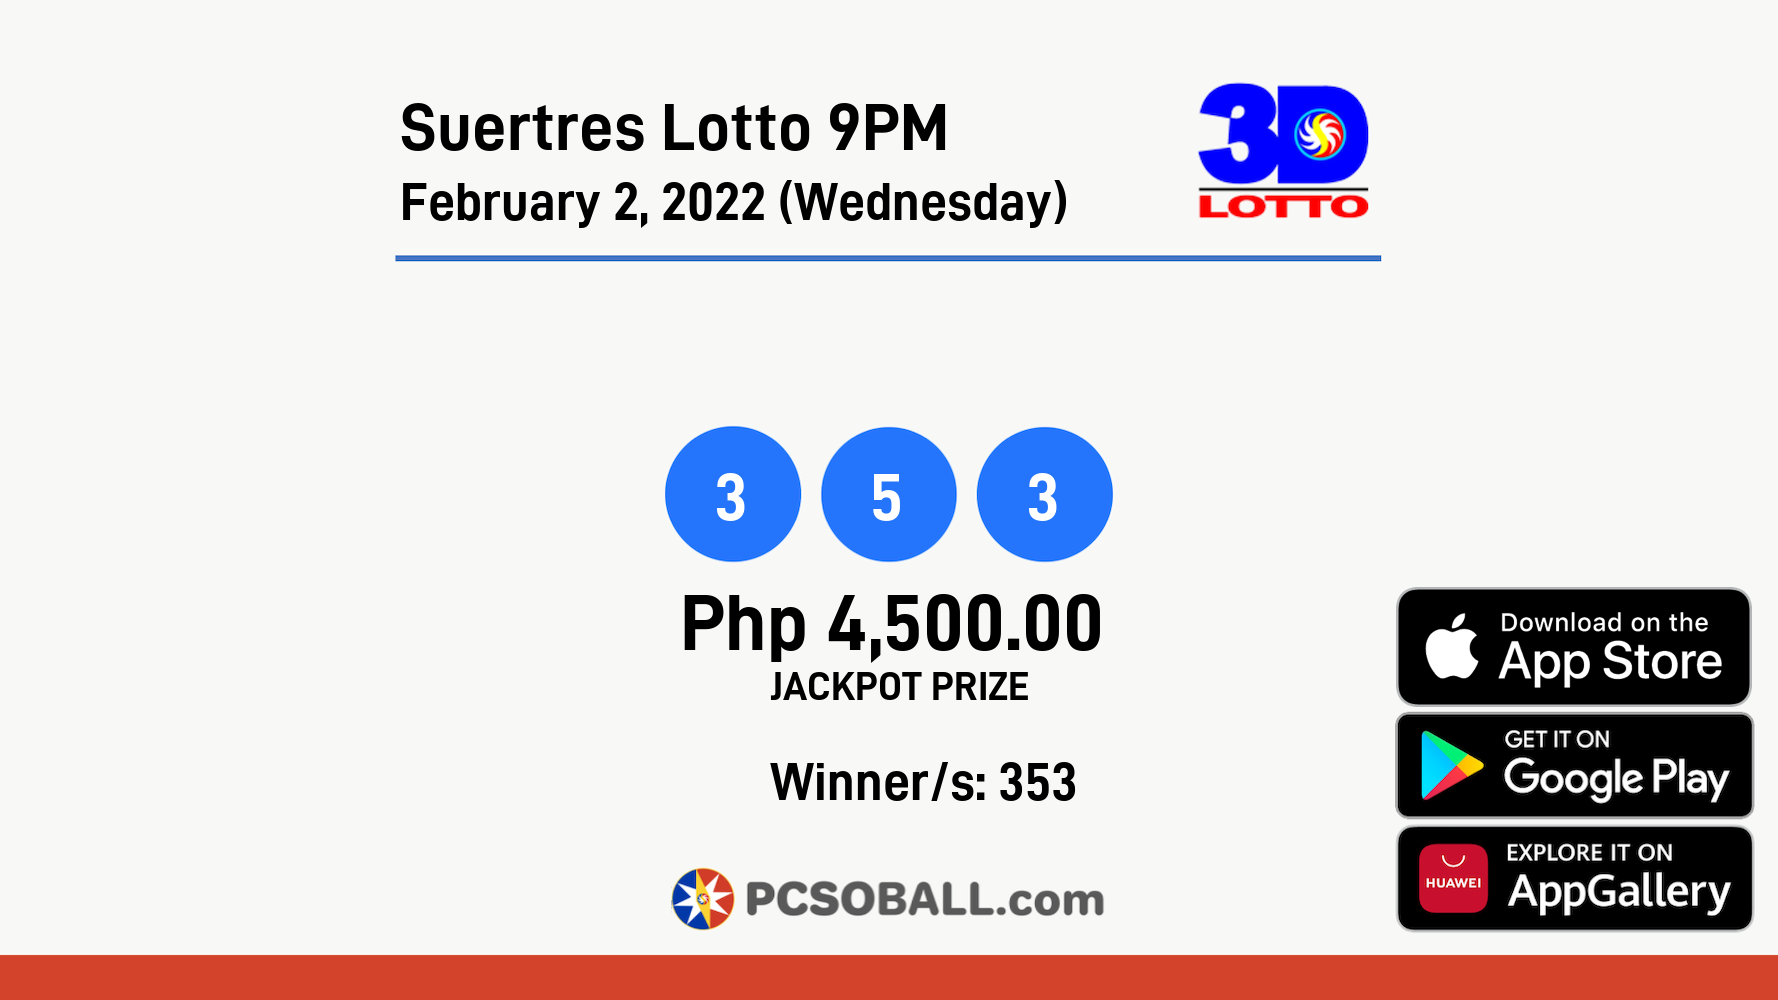 Suertres Lotto 9PM February 2, 2022 (Wednesday) Result